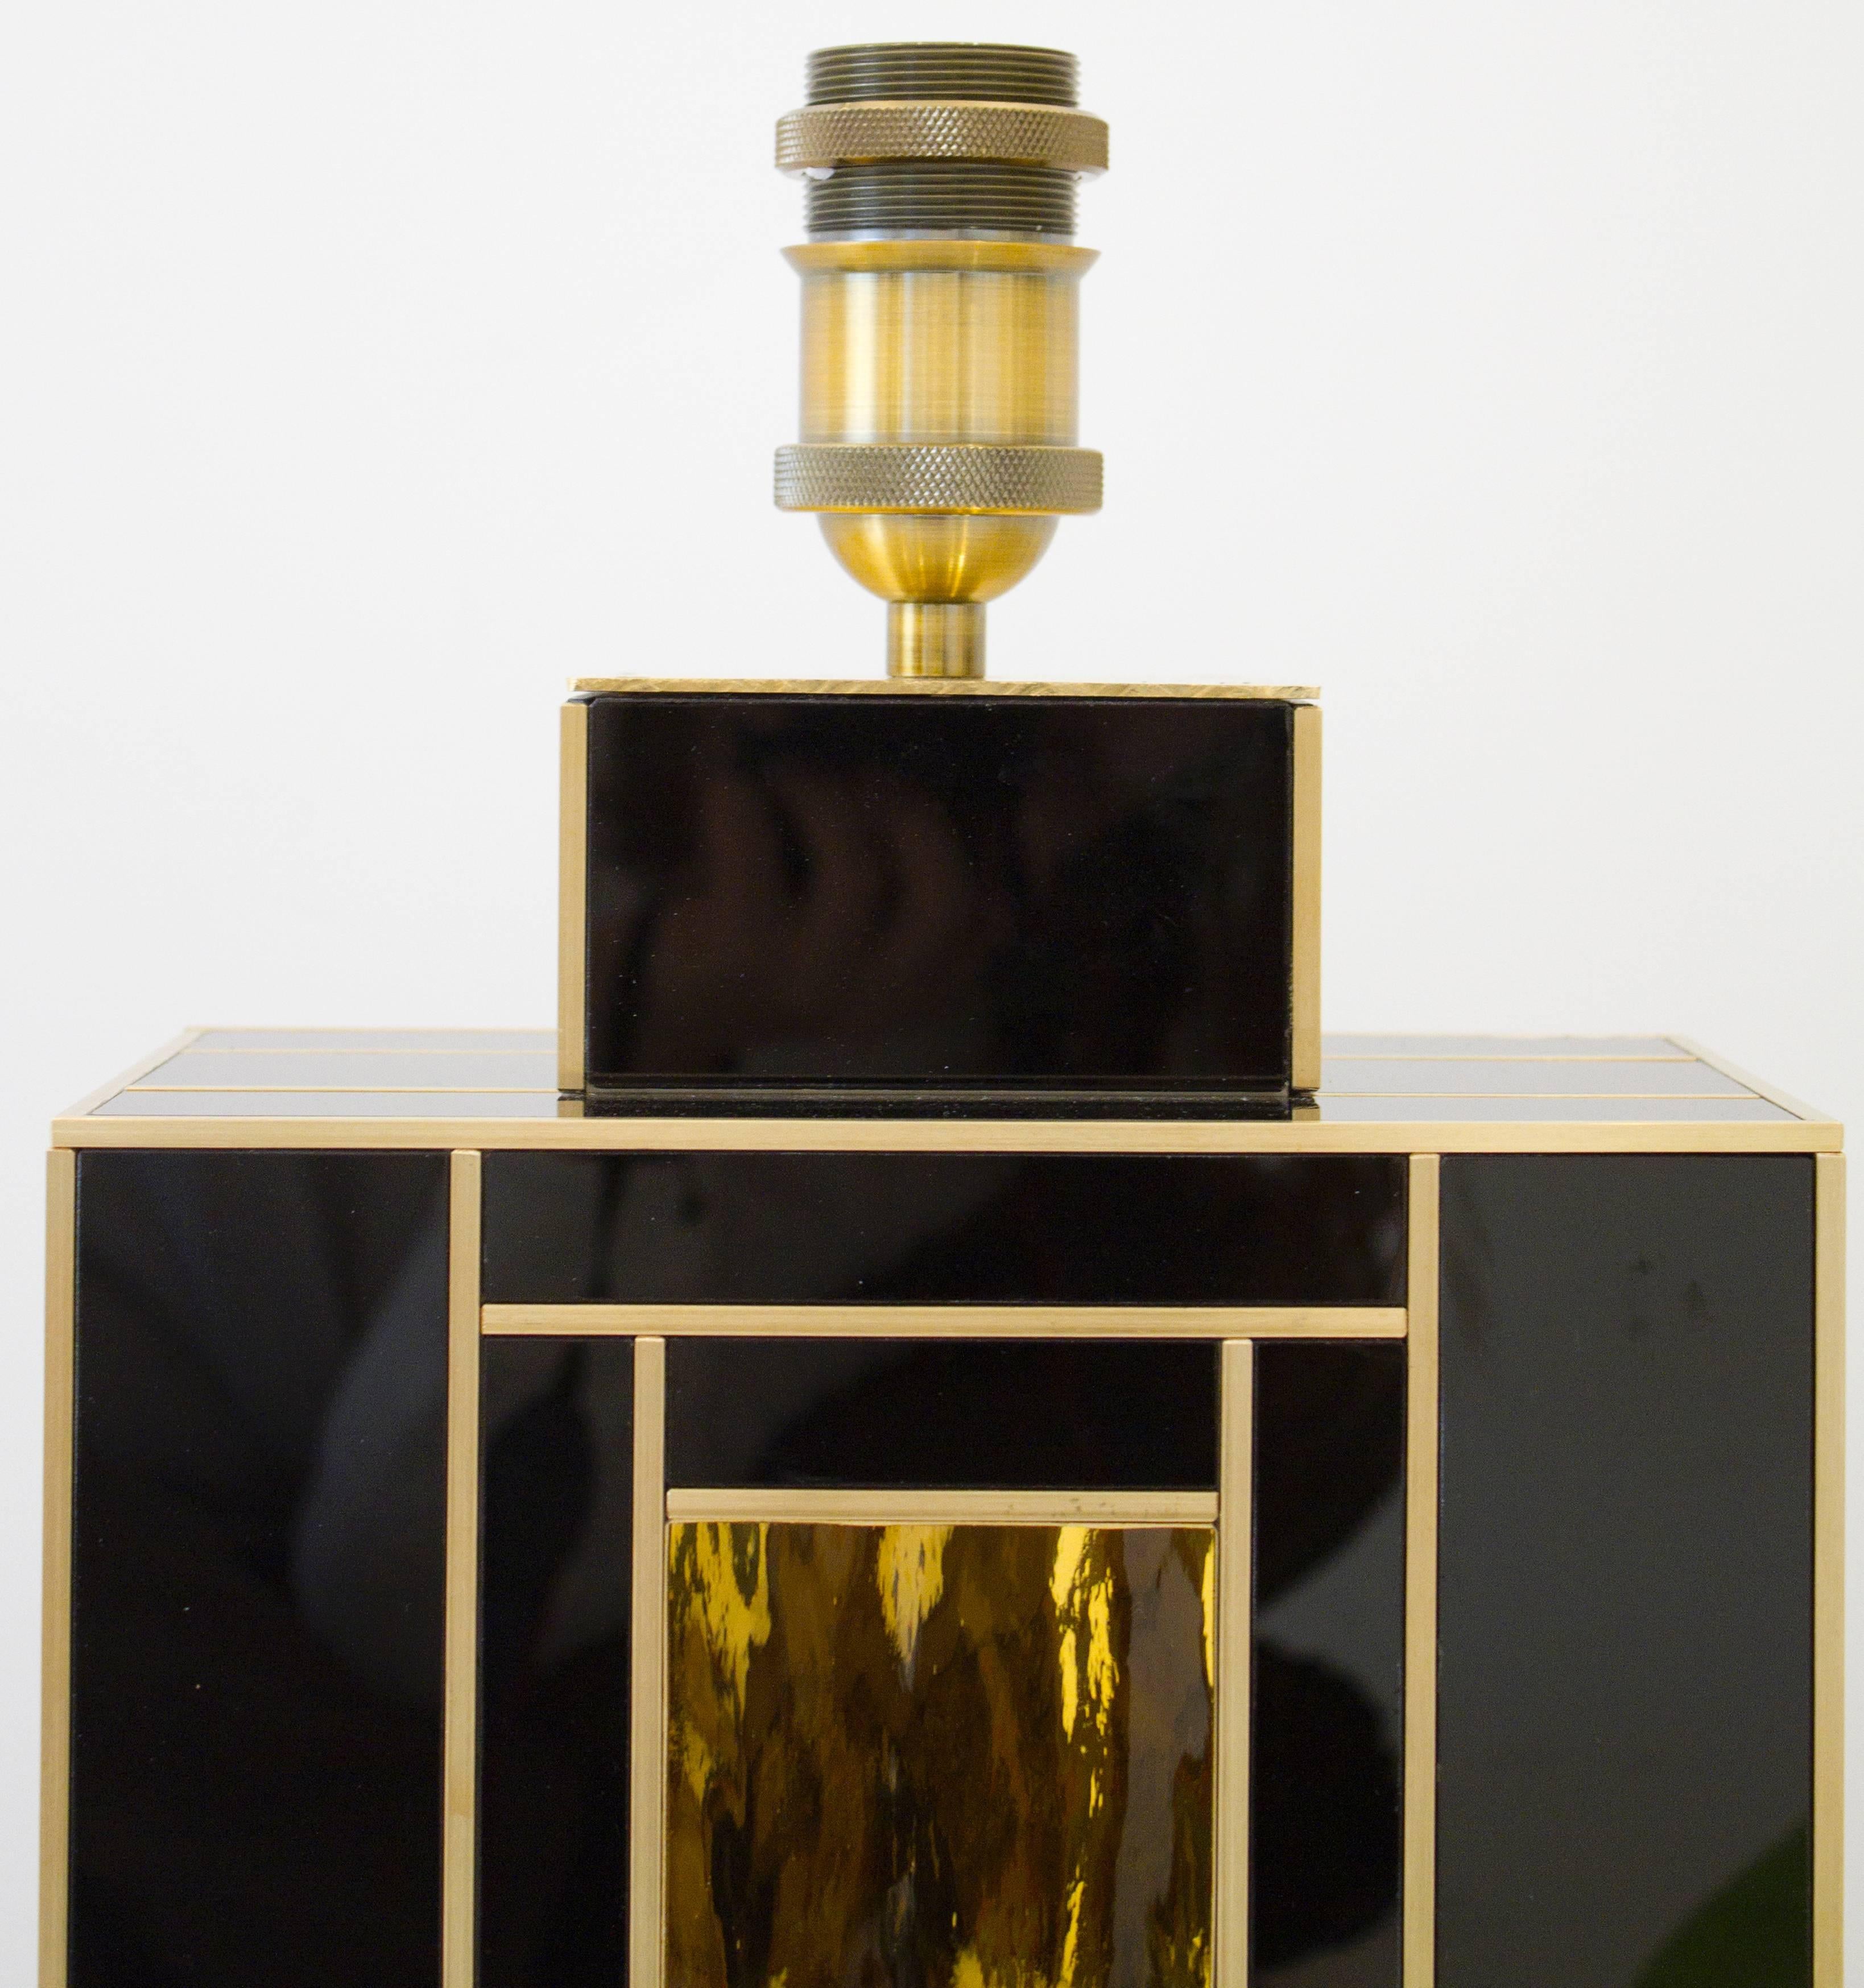 One of a kind pair of rectangular black art glass lamps with textured square gold glass inserts in center. Each glass element is separated and set out by solid brass inlays. Solid and heavy. Handcrafted in Spain and signed by artist/maker.